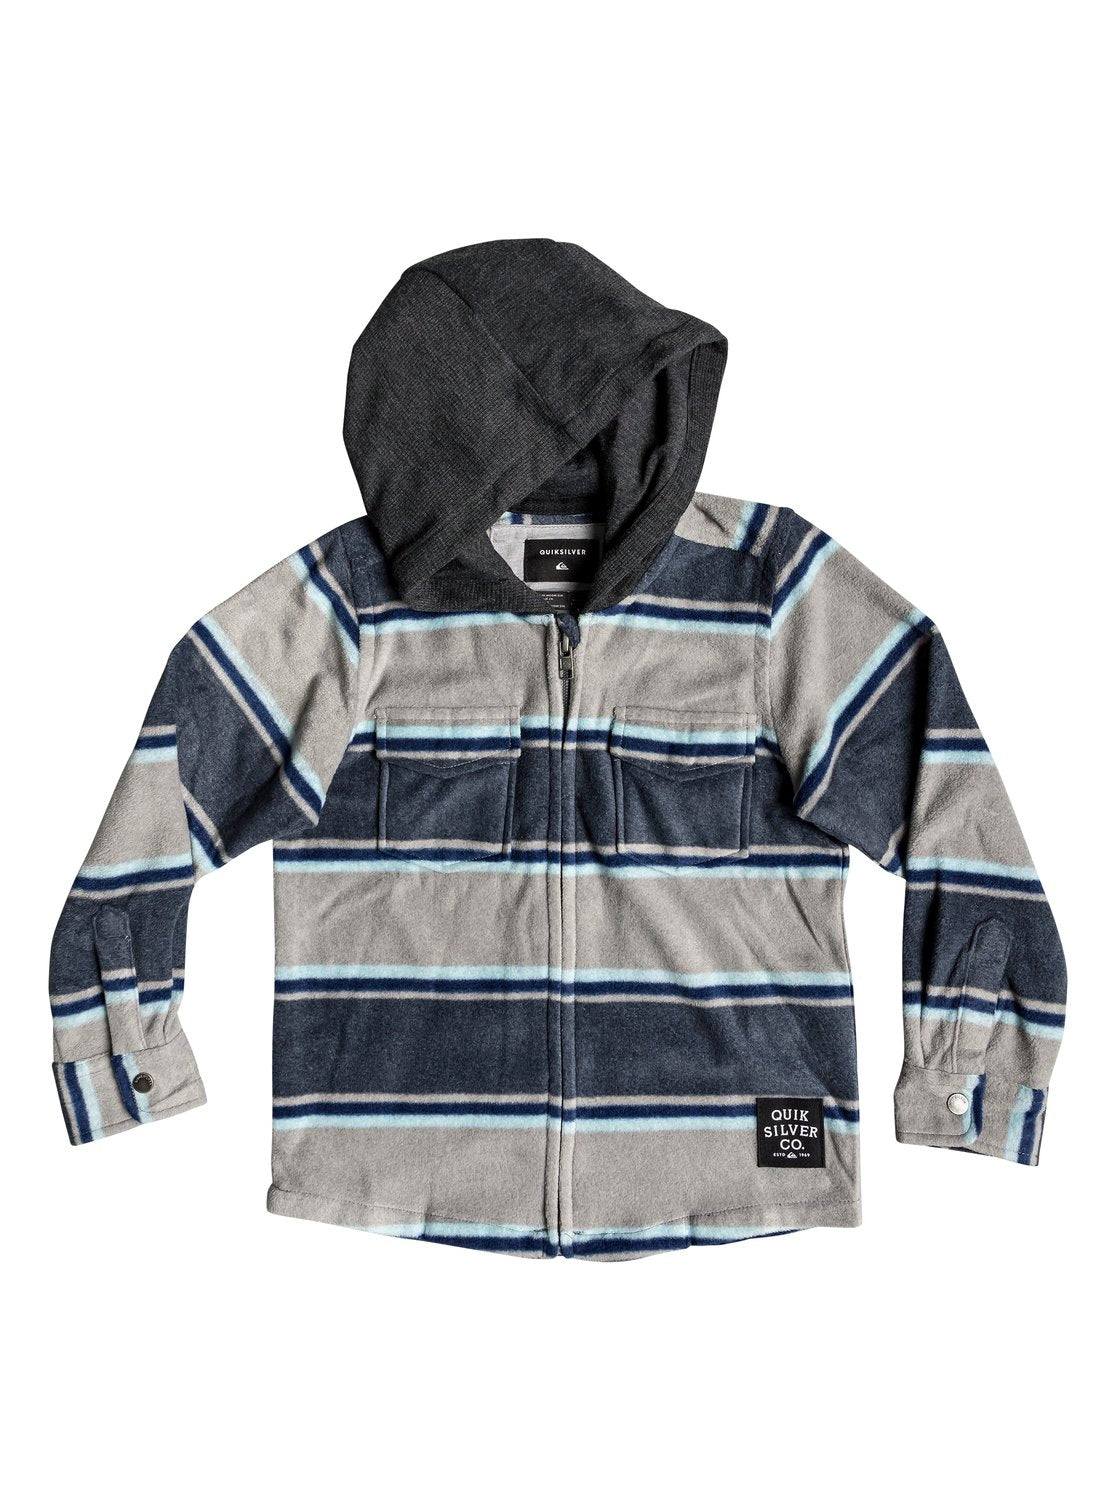 Quiksilver Surf Days Youth Jacket BST3 6